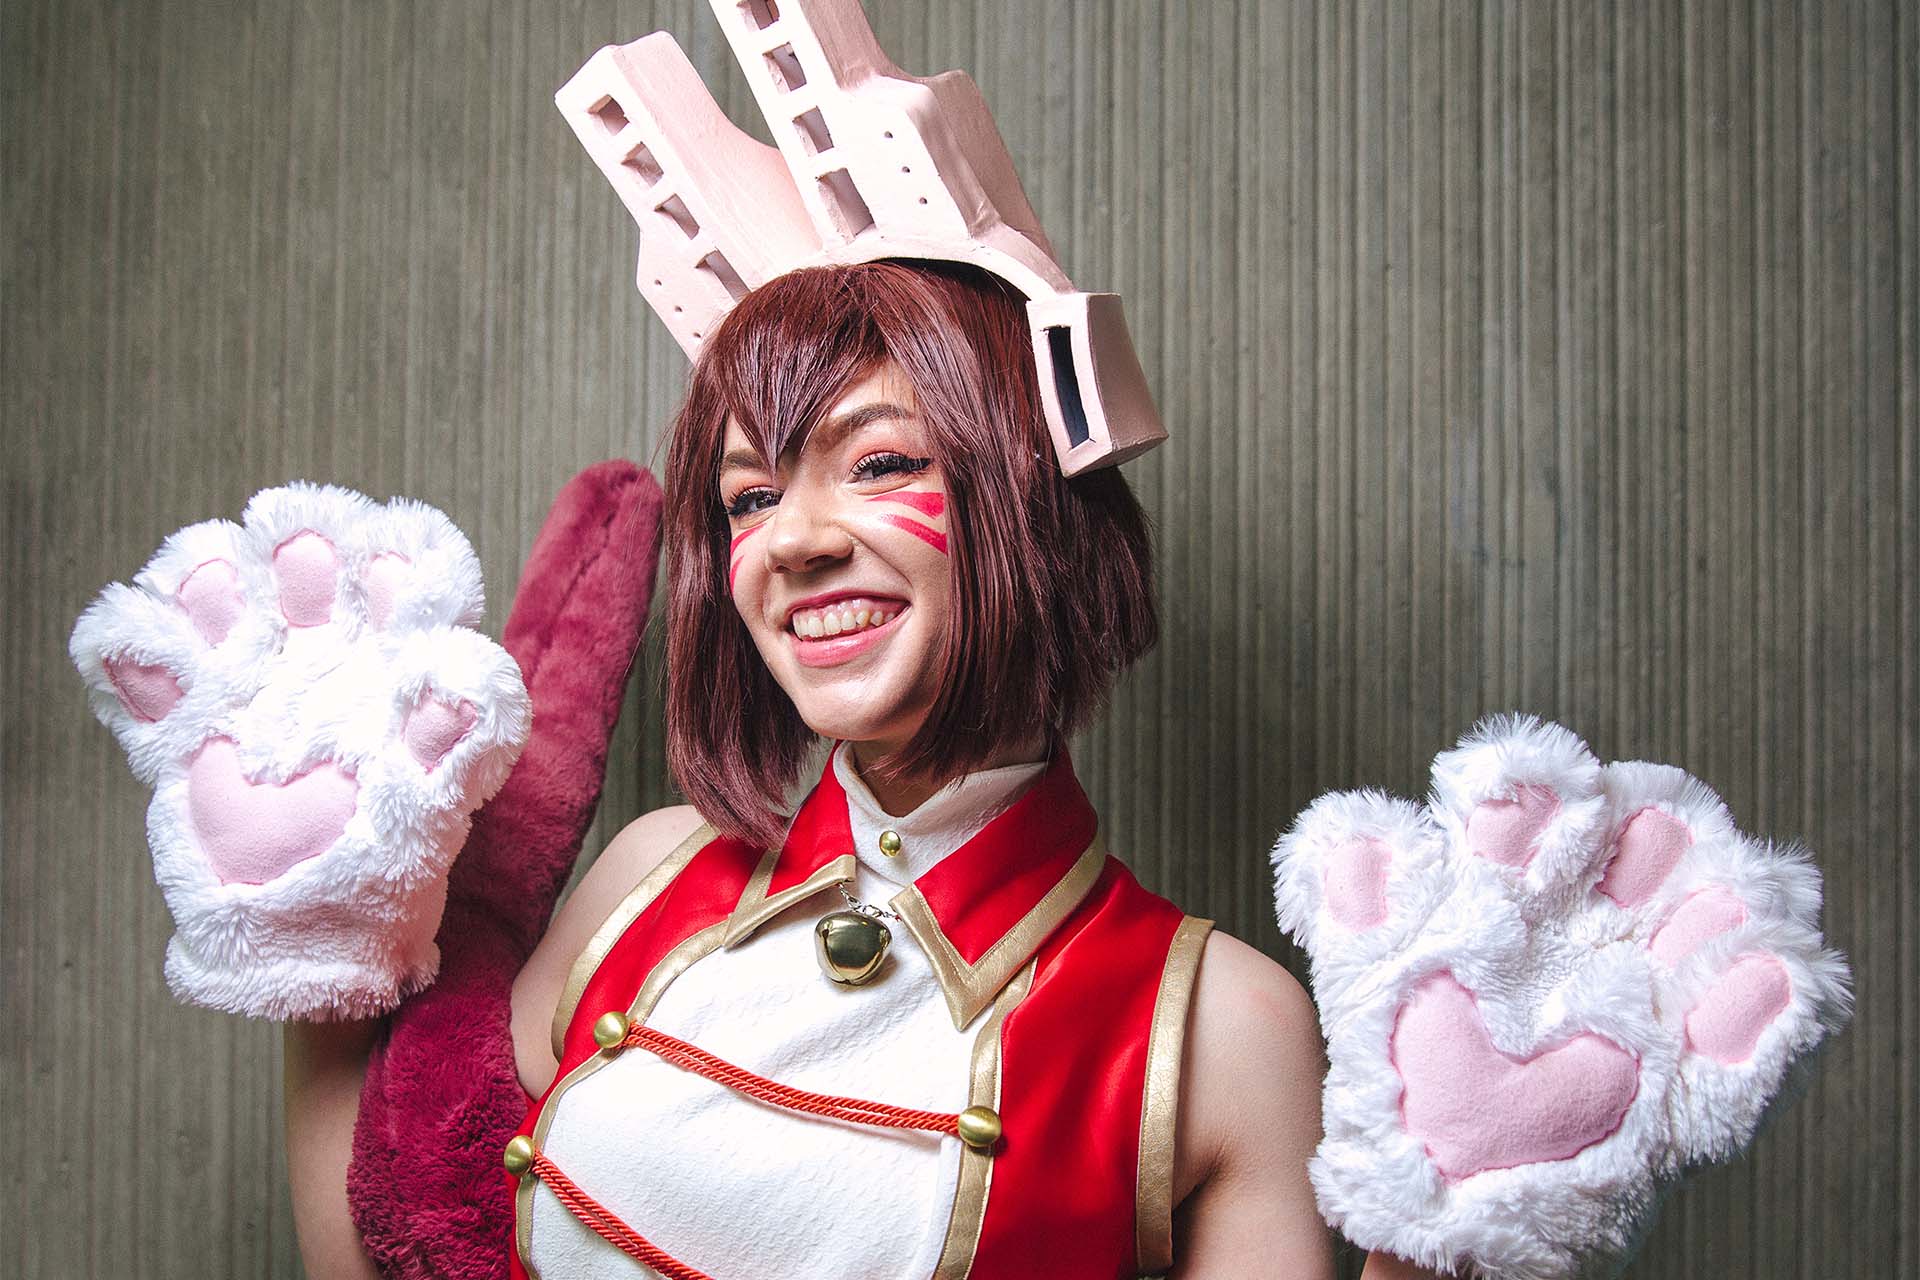 Teaser image for Hannah Franke: Local student thrives in cosplay club